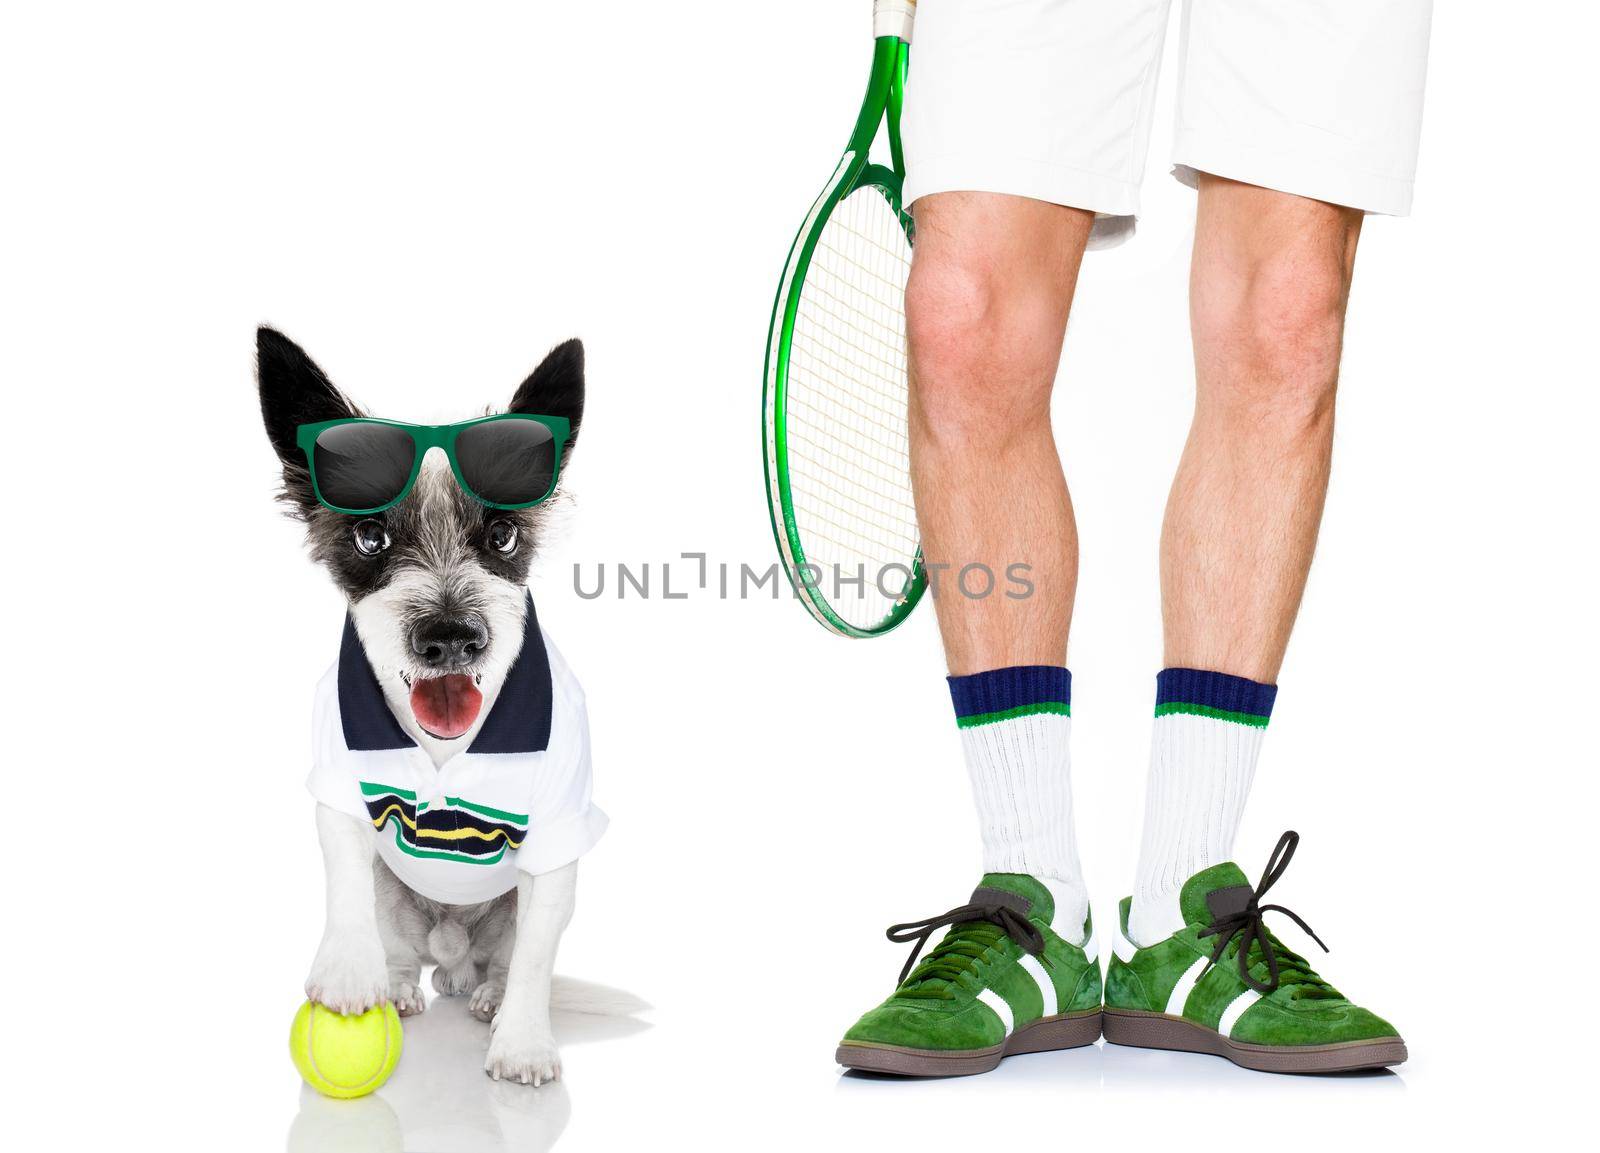 poodle  dog with owner as tennis player with ball and racket or racquet isolated on white background, ready to play a game